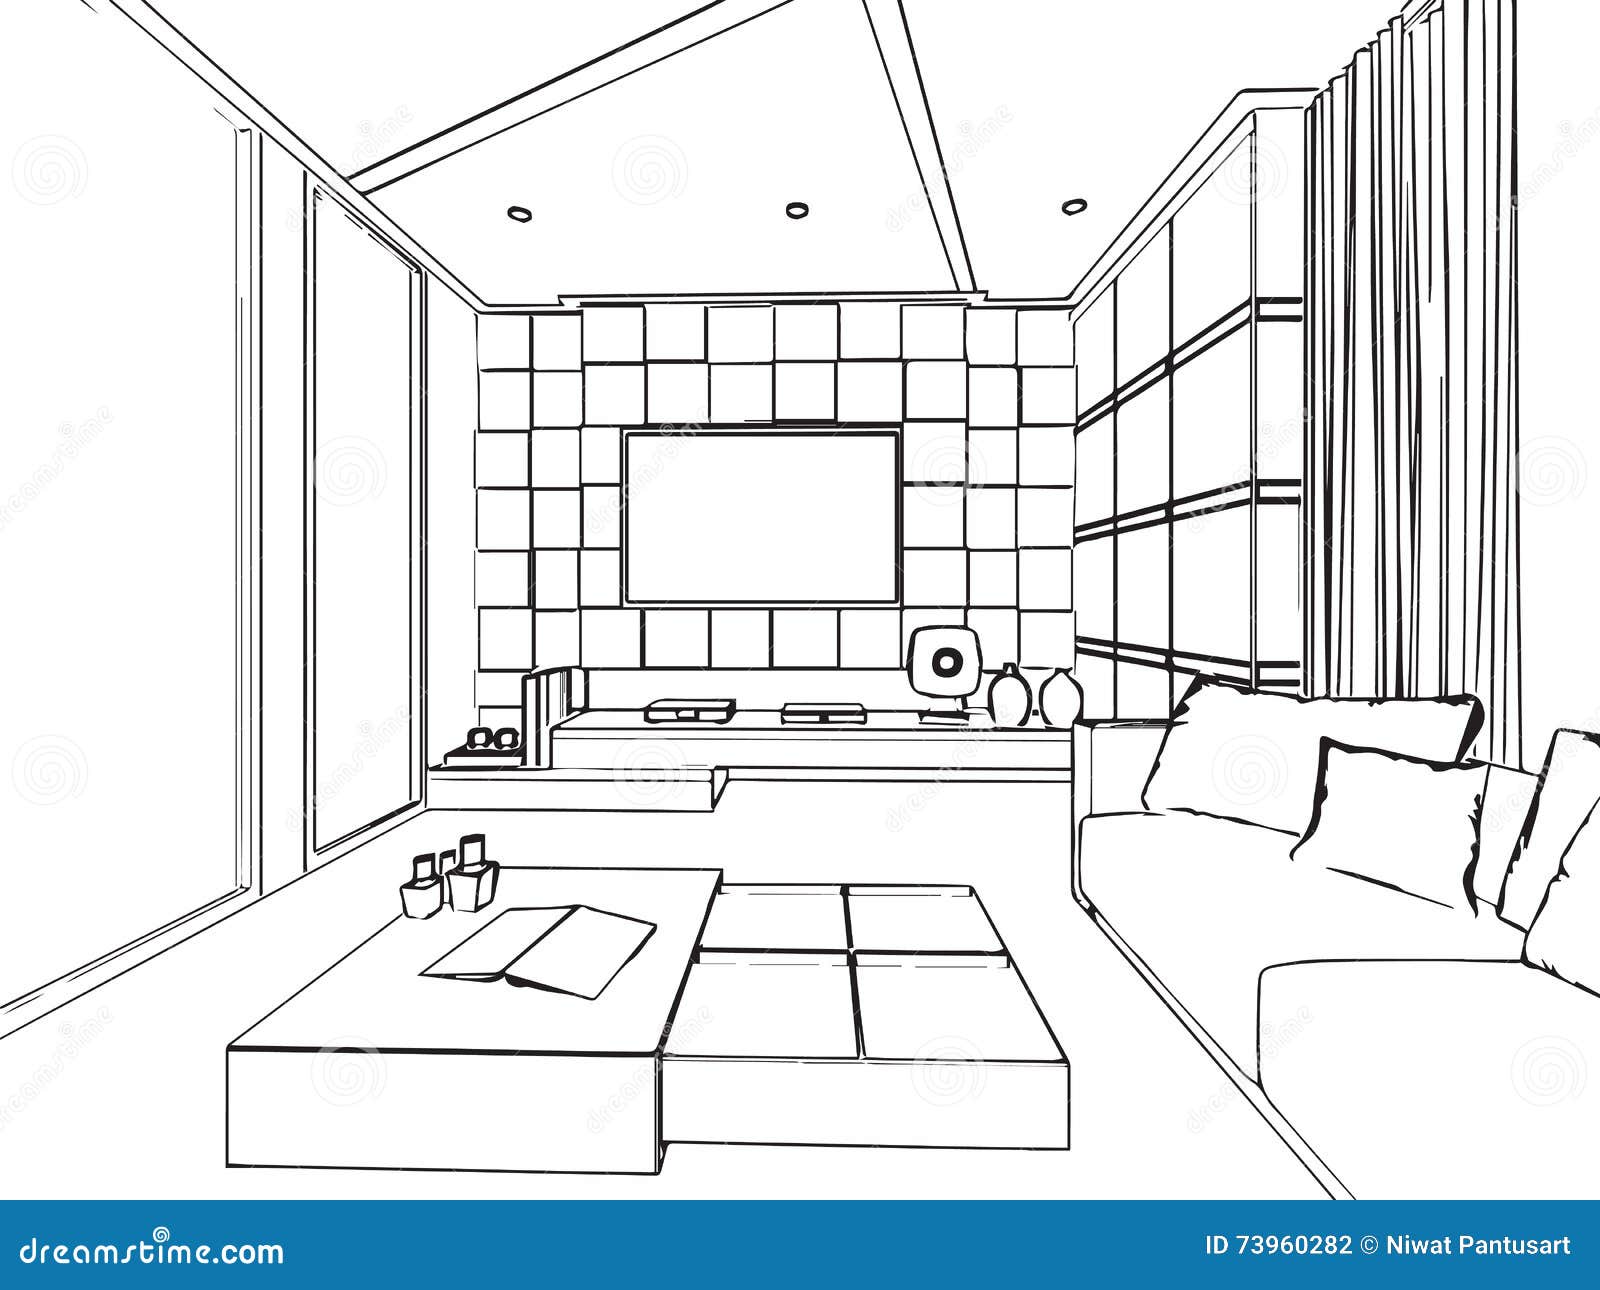 Learn How to Draw One Point Perspective Room One Point Perspective Step  by Step  Drawing Tutorials